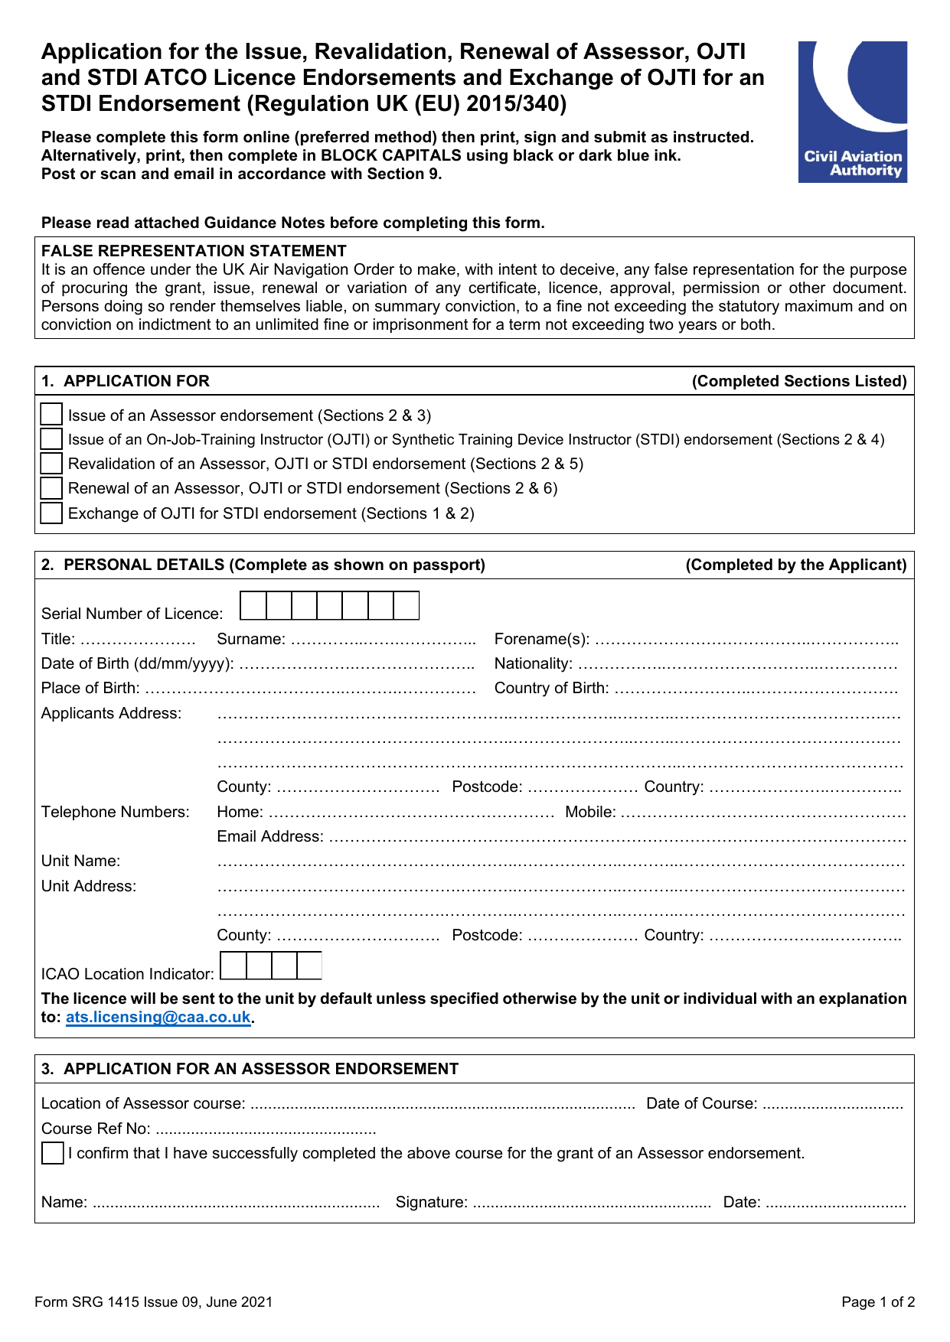 Form SRG1415 Application for the Issue, Revalidation, Renewal of Assessor, Ojti and Stdi Atco Licence Endorsements and Exchange of Ojti for an Stdi Endorsement - United Kingdom, Page 1